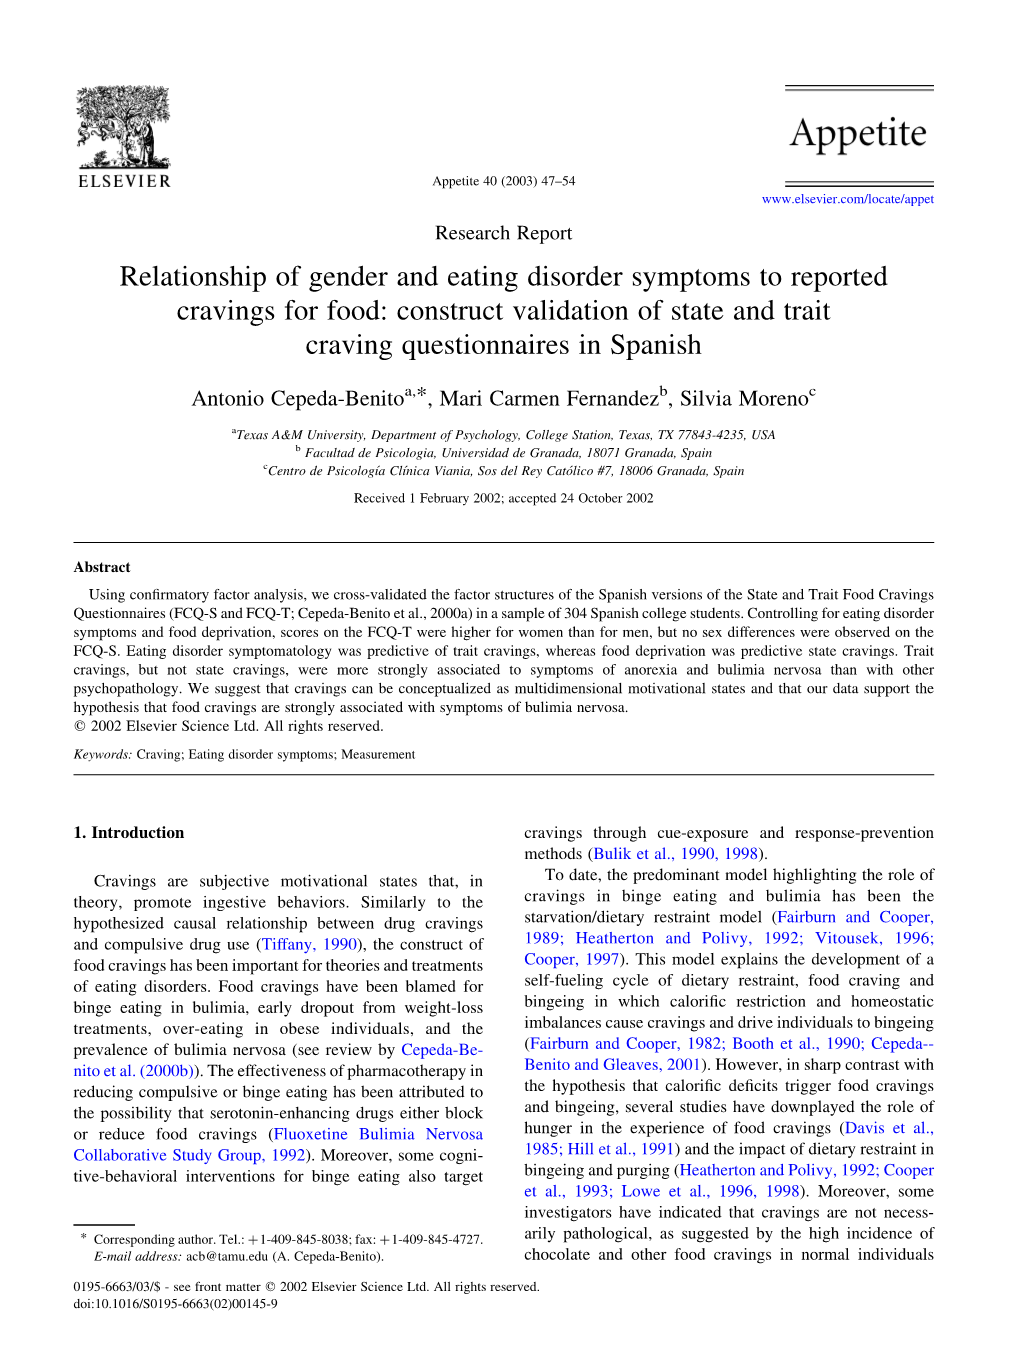 Relationship of Gender and Eating Disorder Symptoms to Reported Cravings for Food: Construct Validation of State and Trait Craving Questionnaires in Spanish